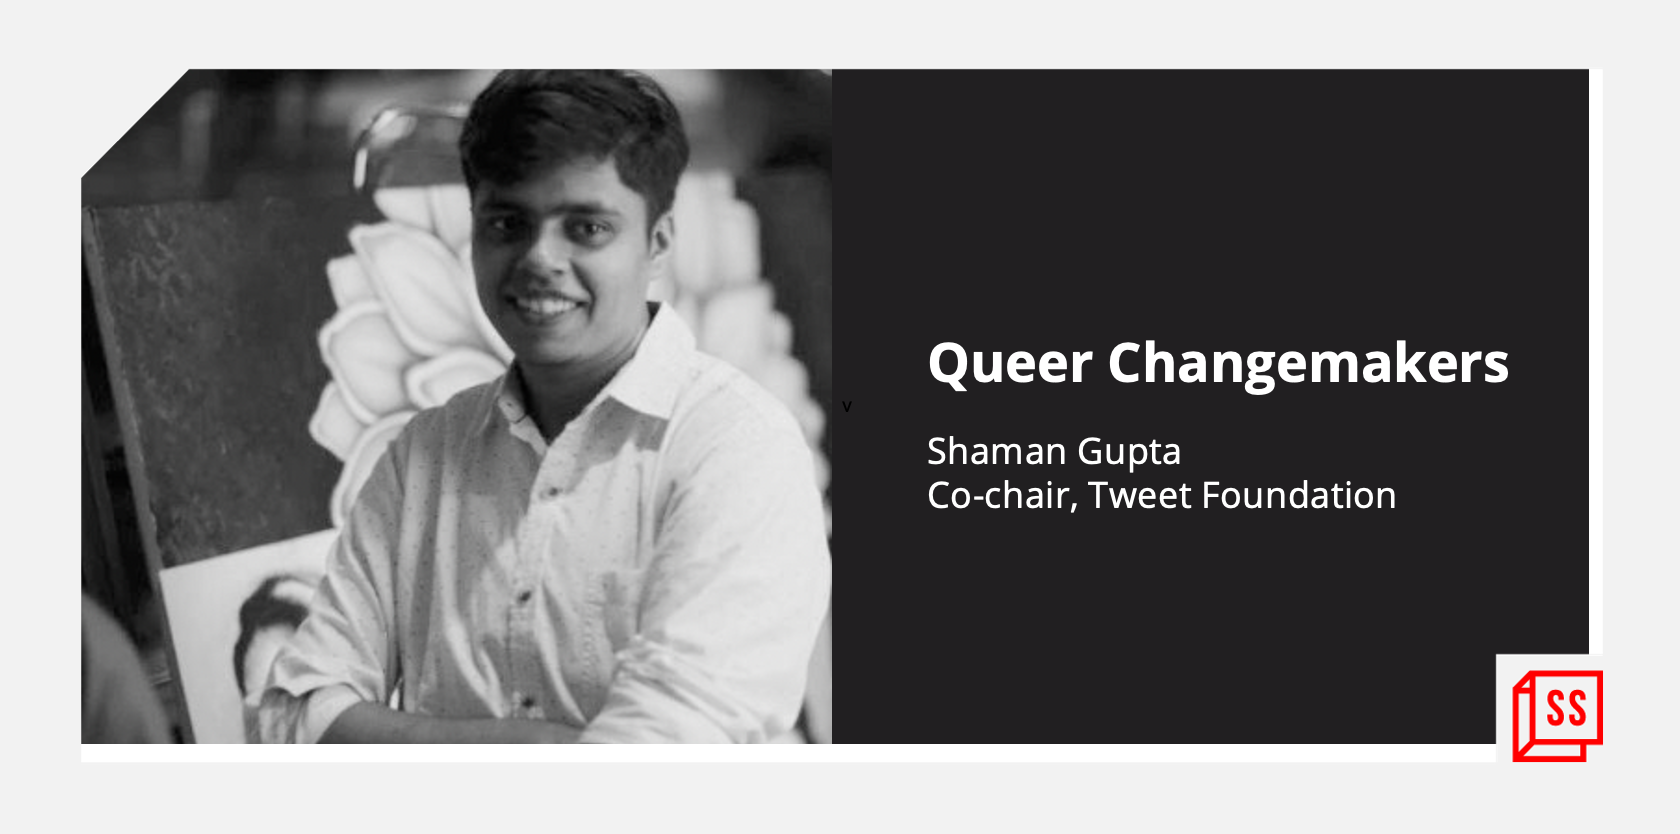 [Queer Changemakers] How Tweet Foundation is solving for Trans Rights and Livelihoods in India
